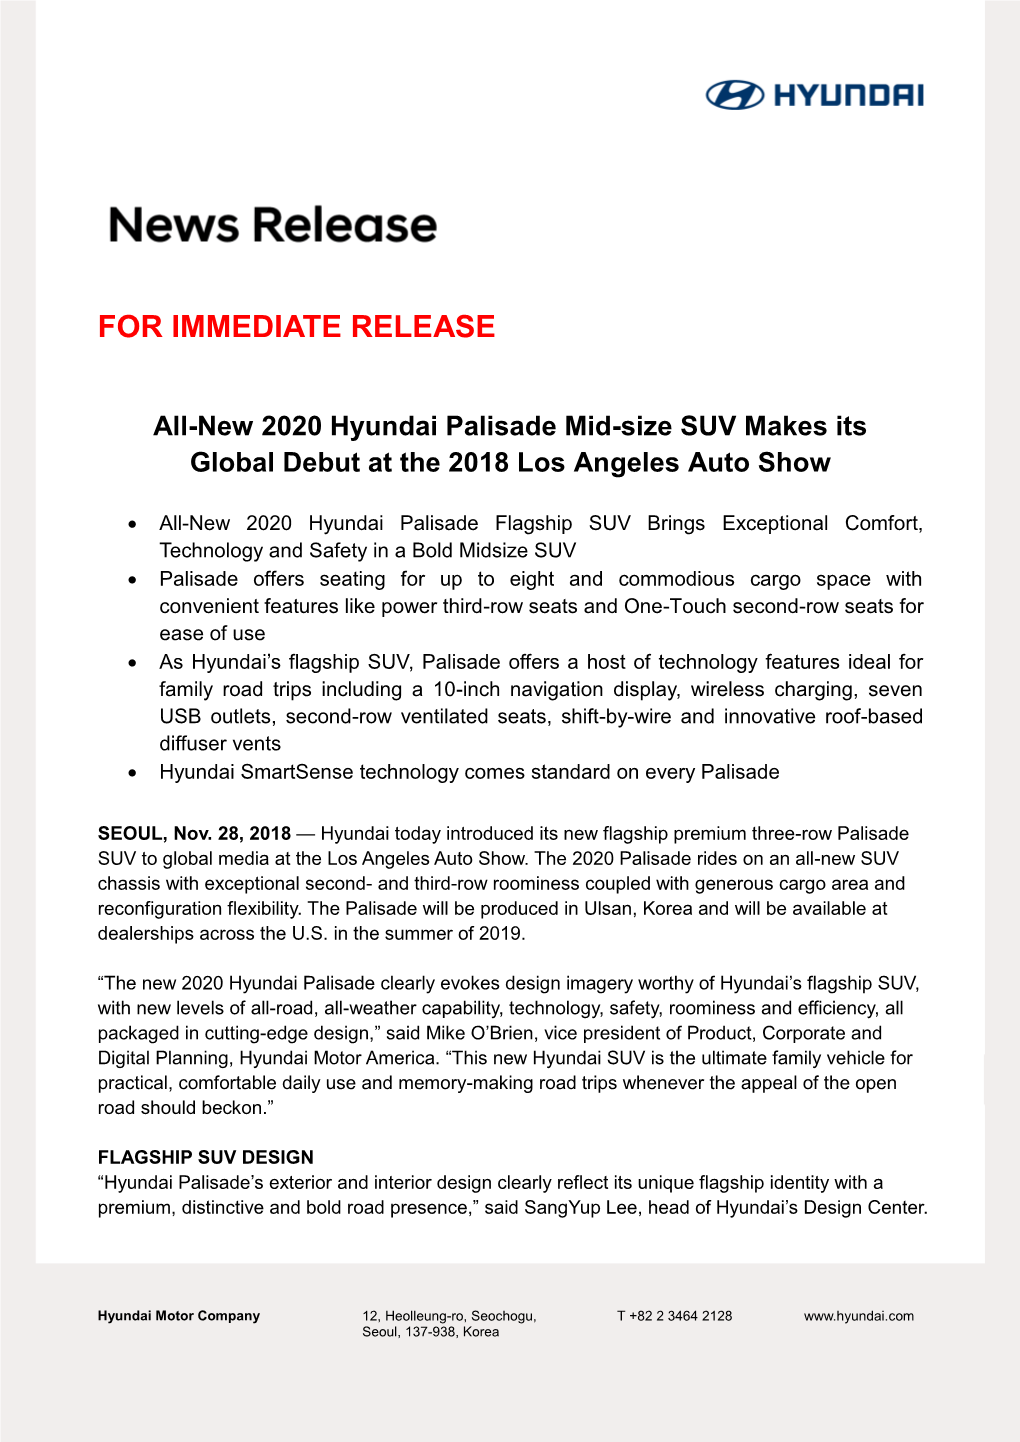 FOR IMMEDIATE RELEASE All-New 2020